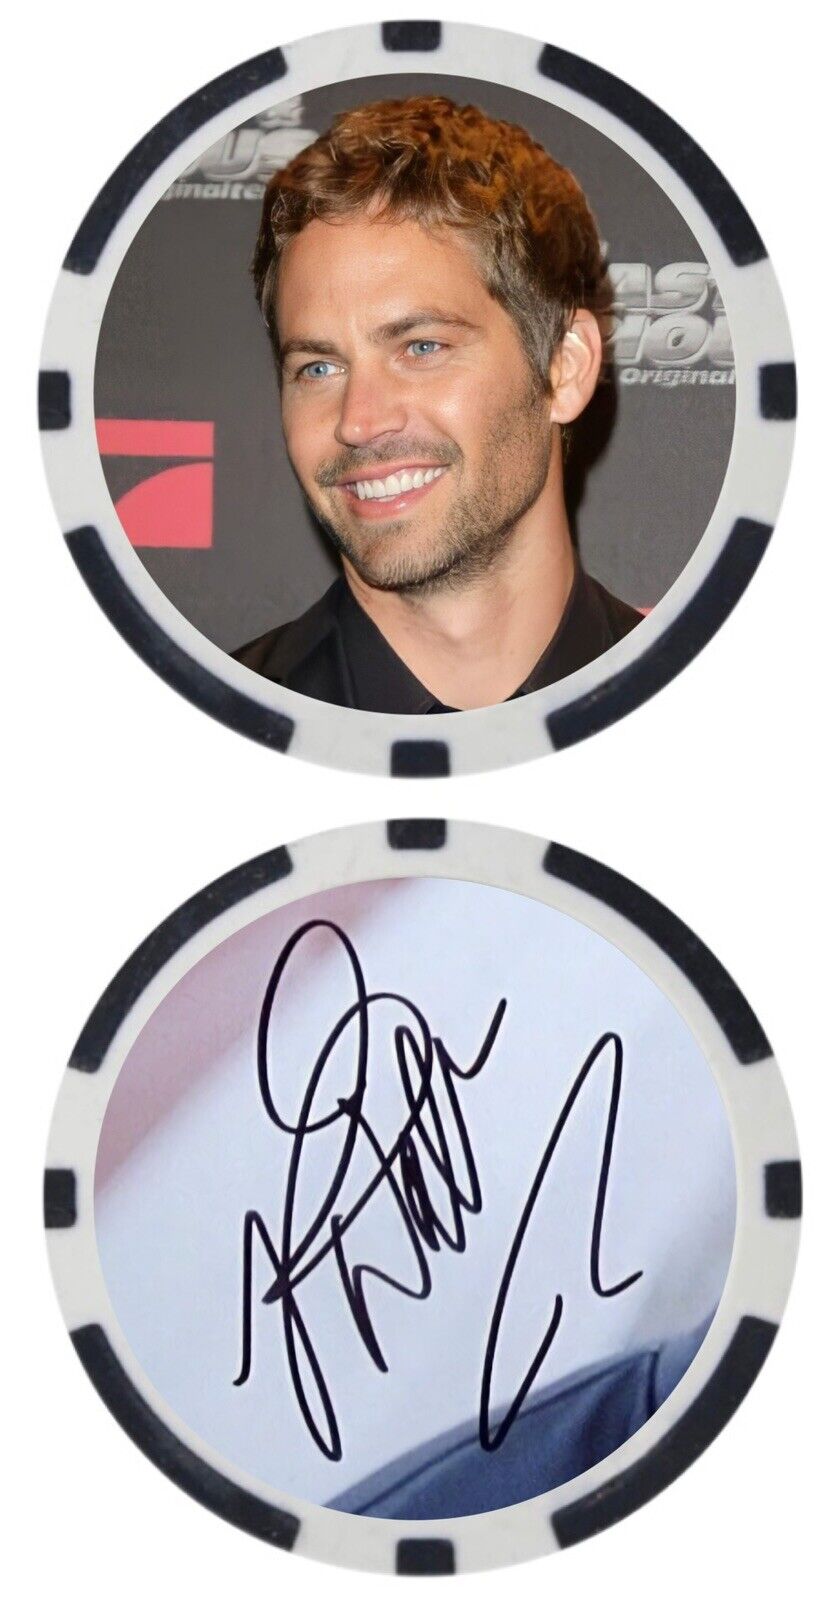 PAUL WALKER - Fast & Furious  - POKER CHIP -  ****SIGNED/AUTO***